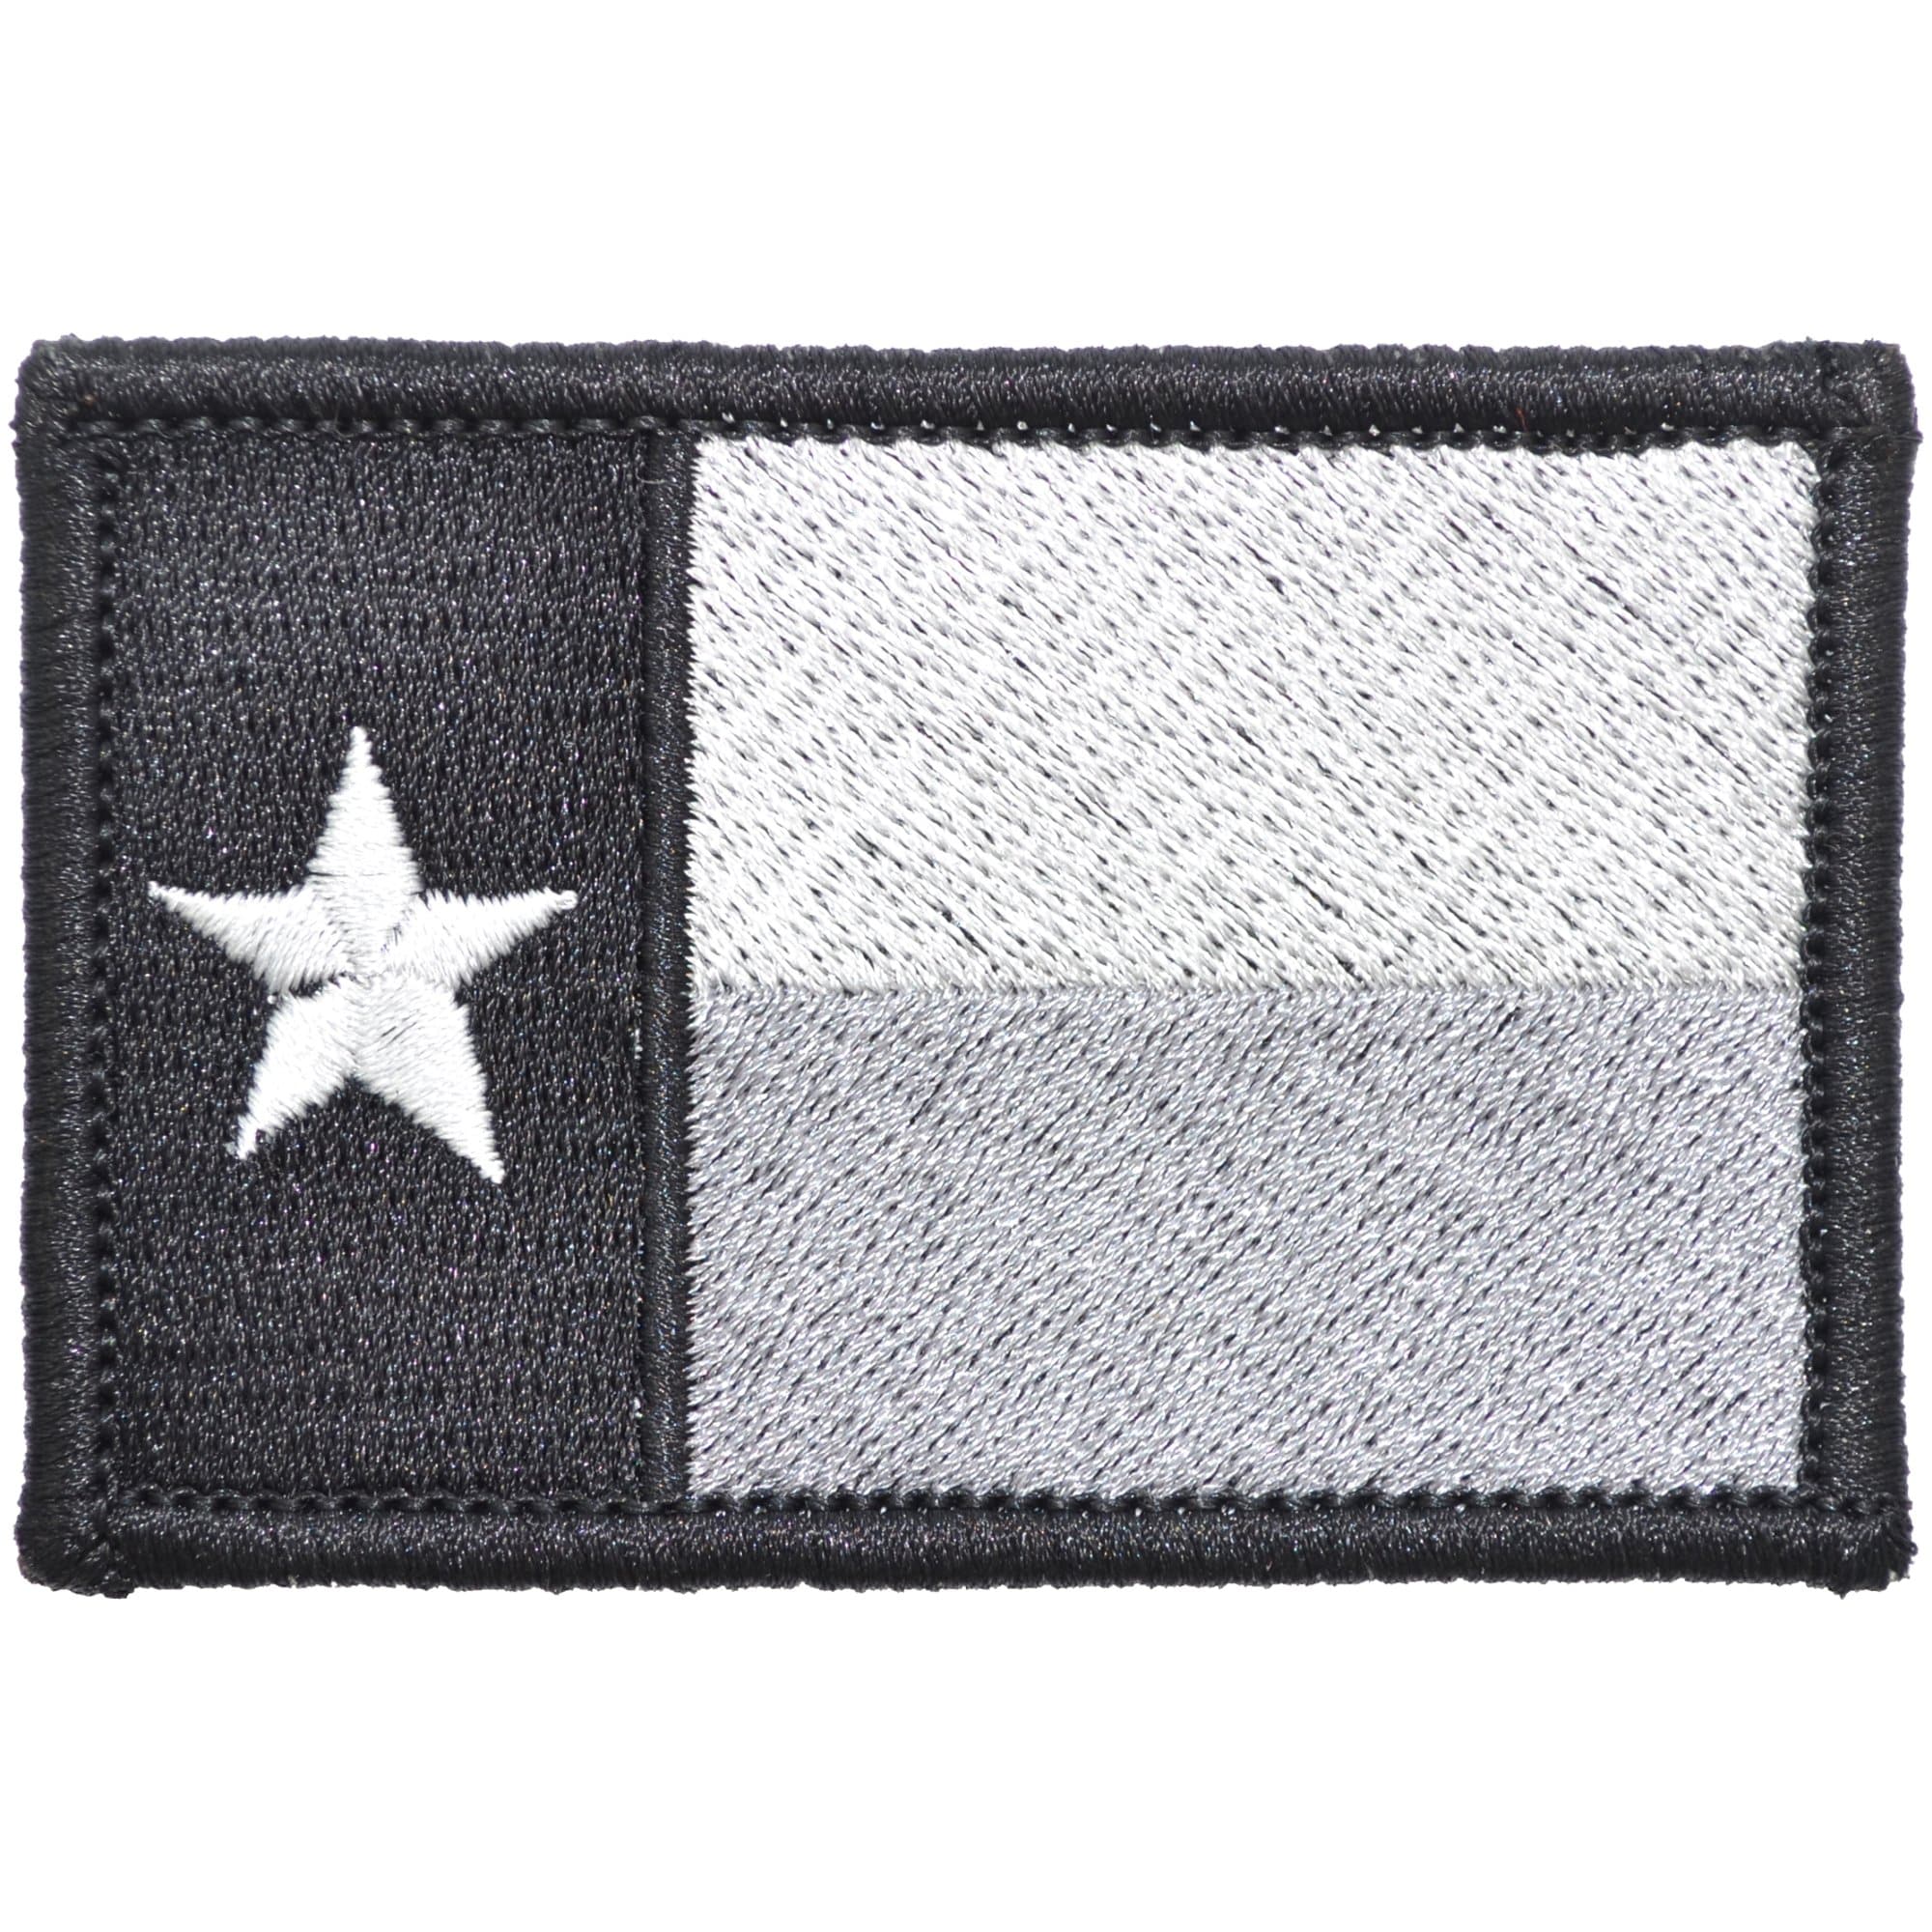 Tactical Gear Junkie Patches Black Texas State Flag - 2x3 Patch